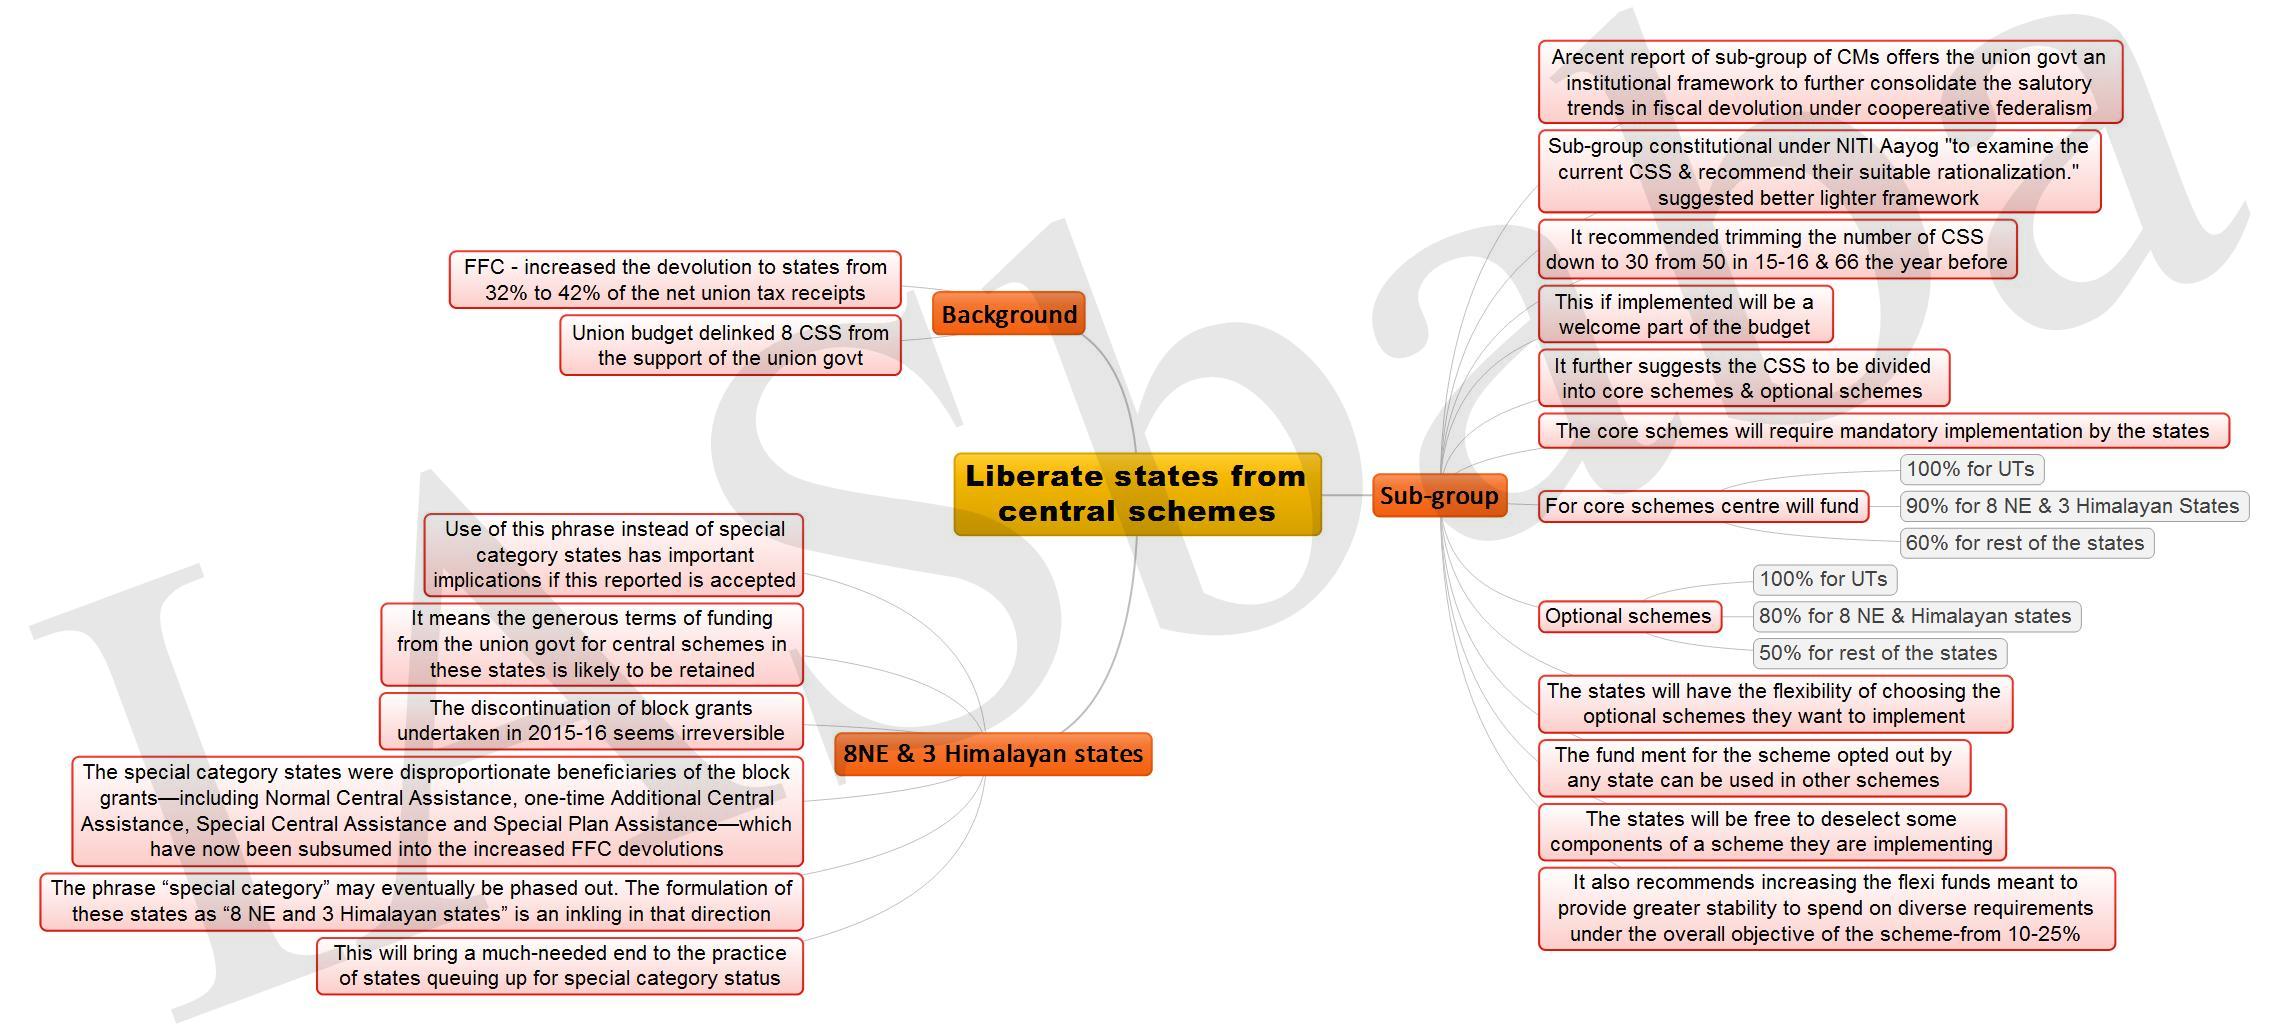 Liberate states from central schemes